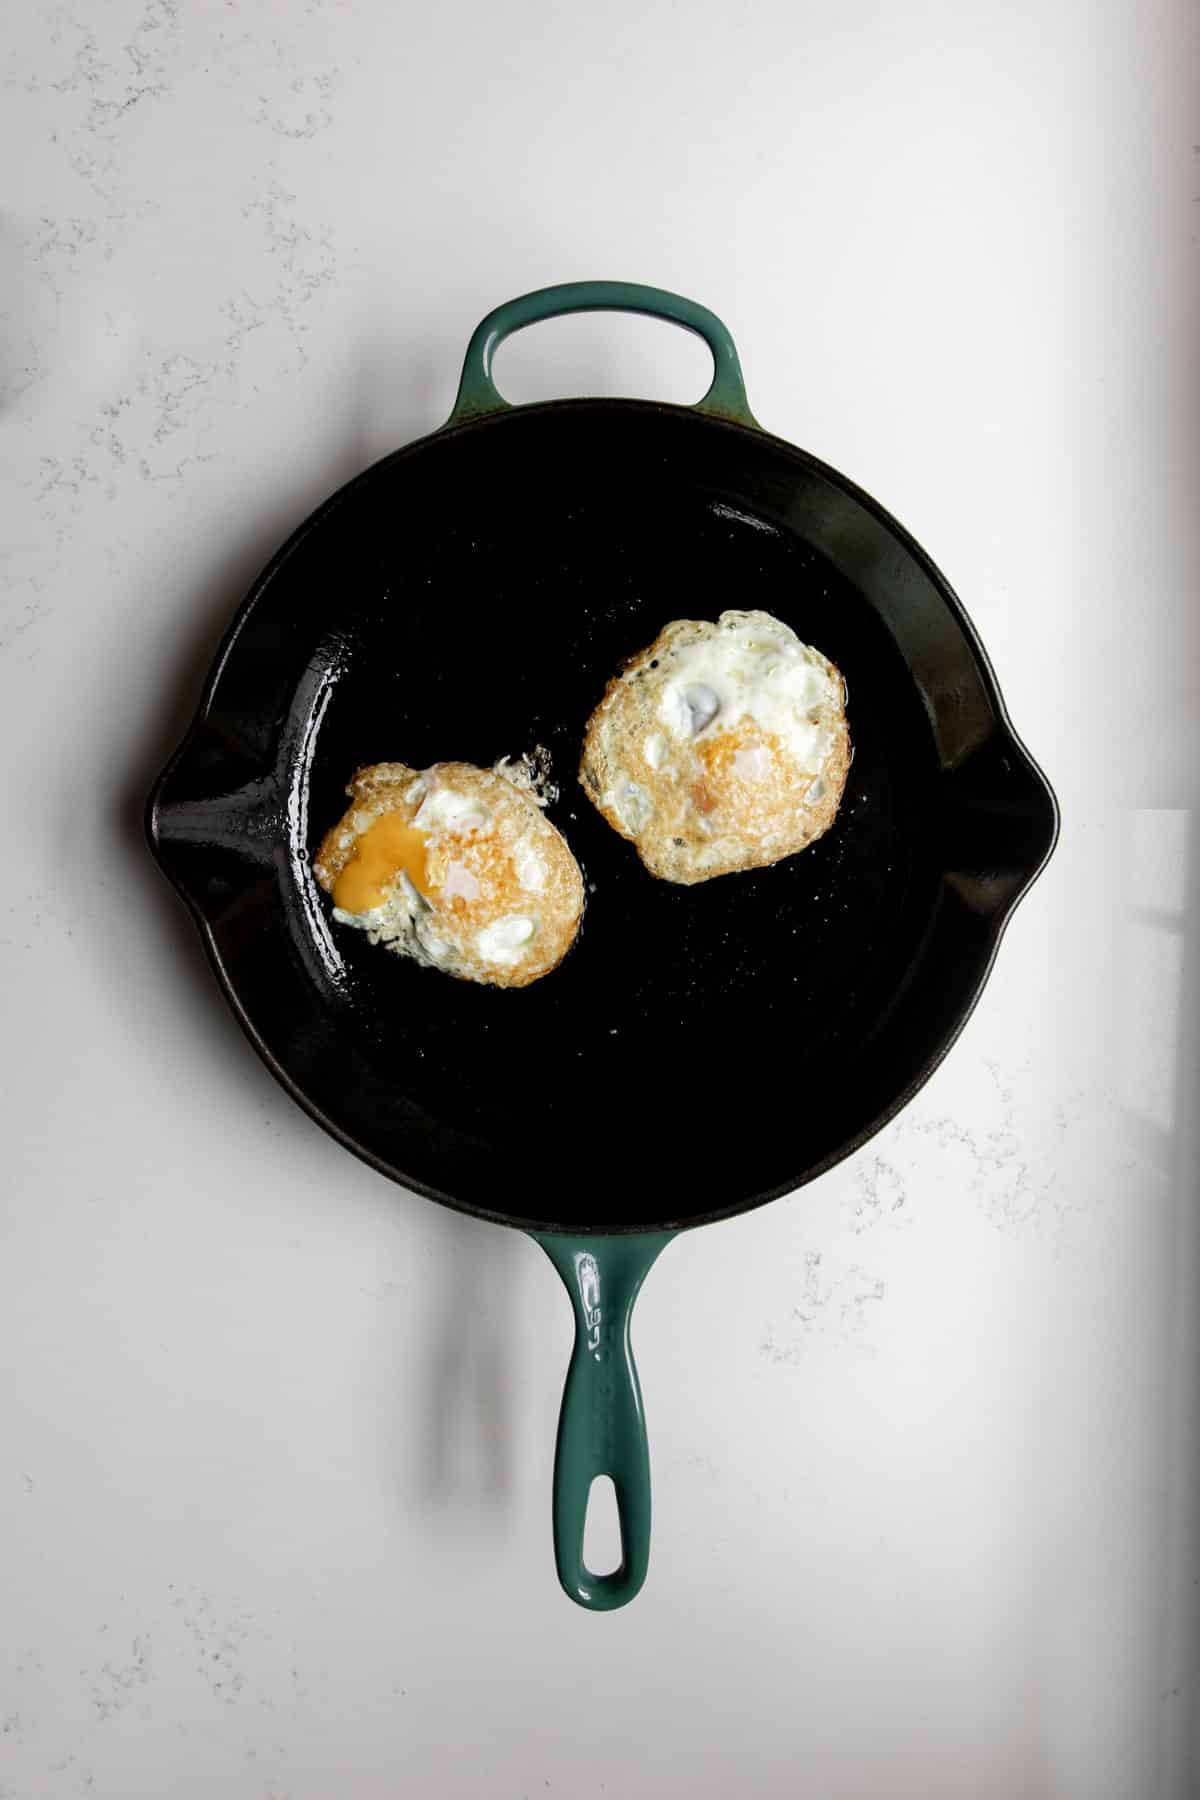 Two over-easy eggs on a cast iron skillet.